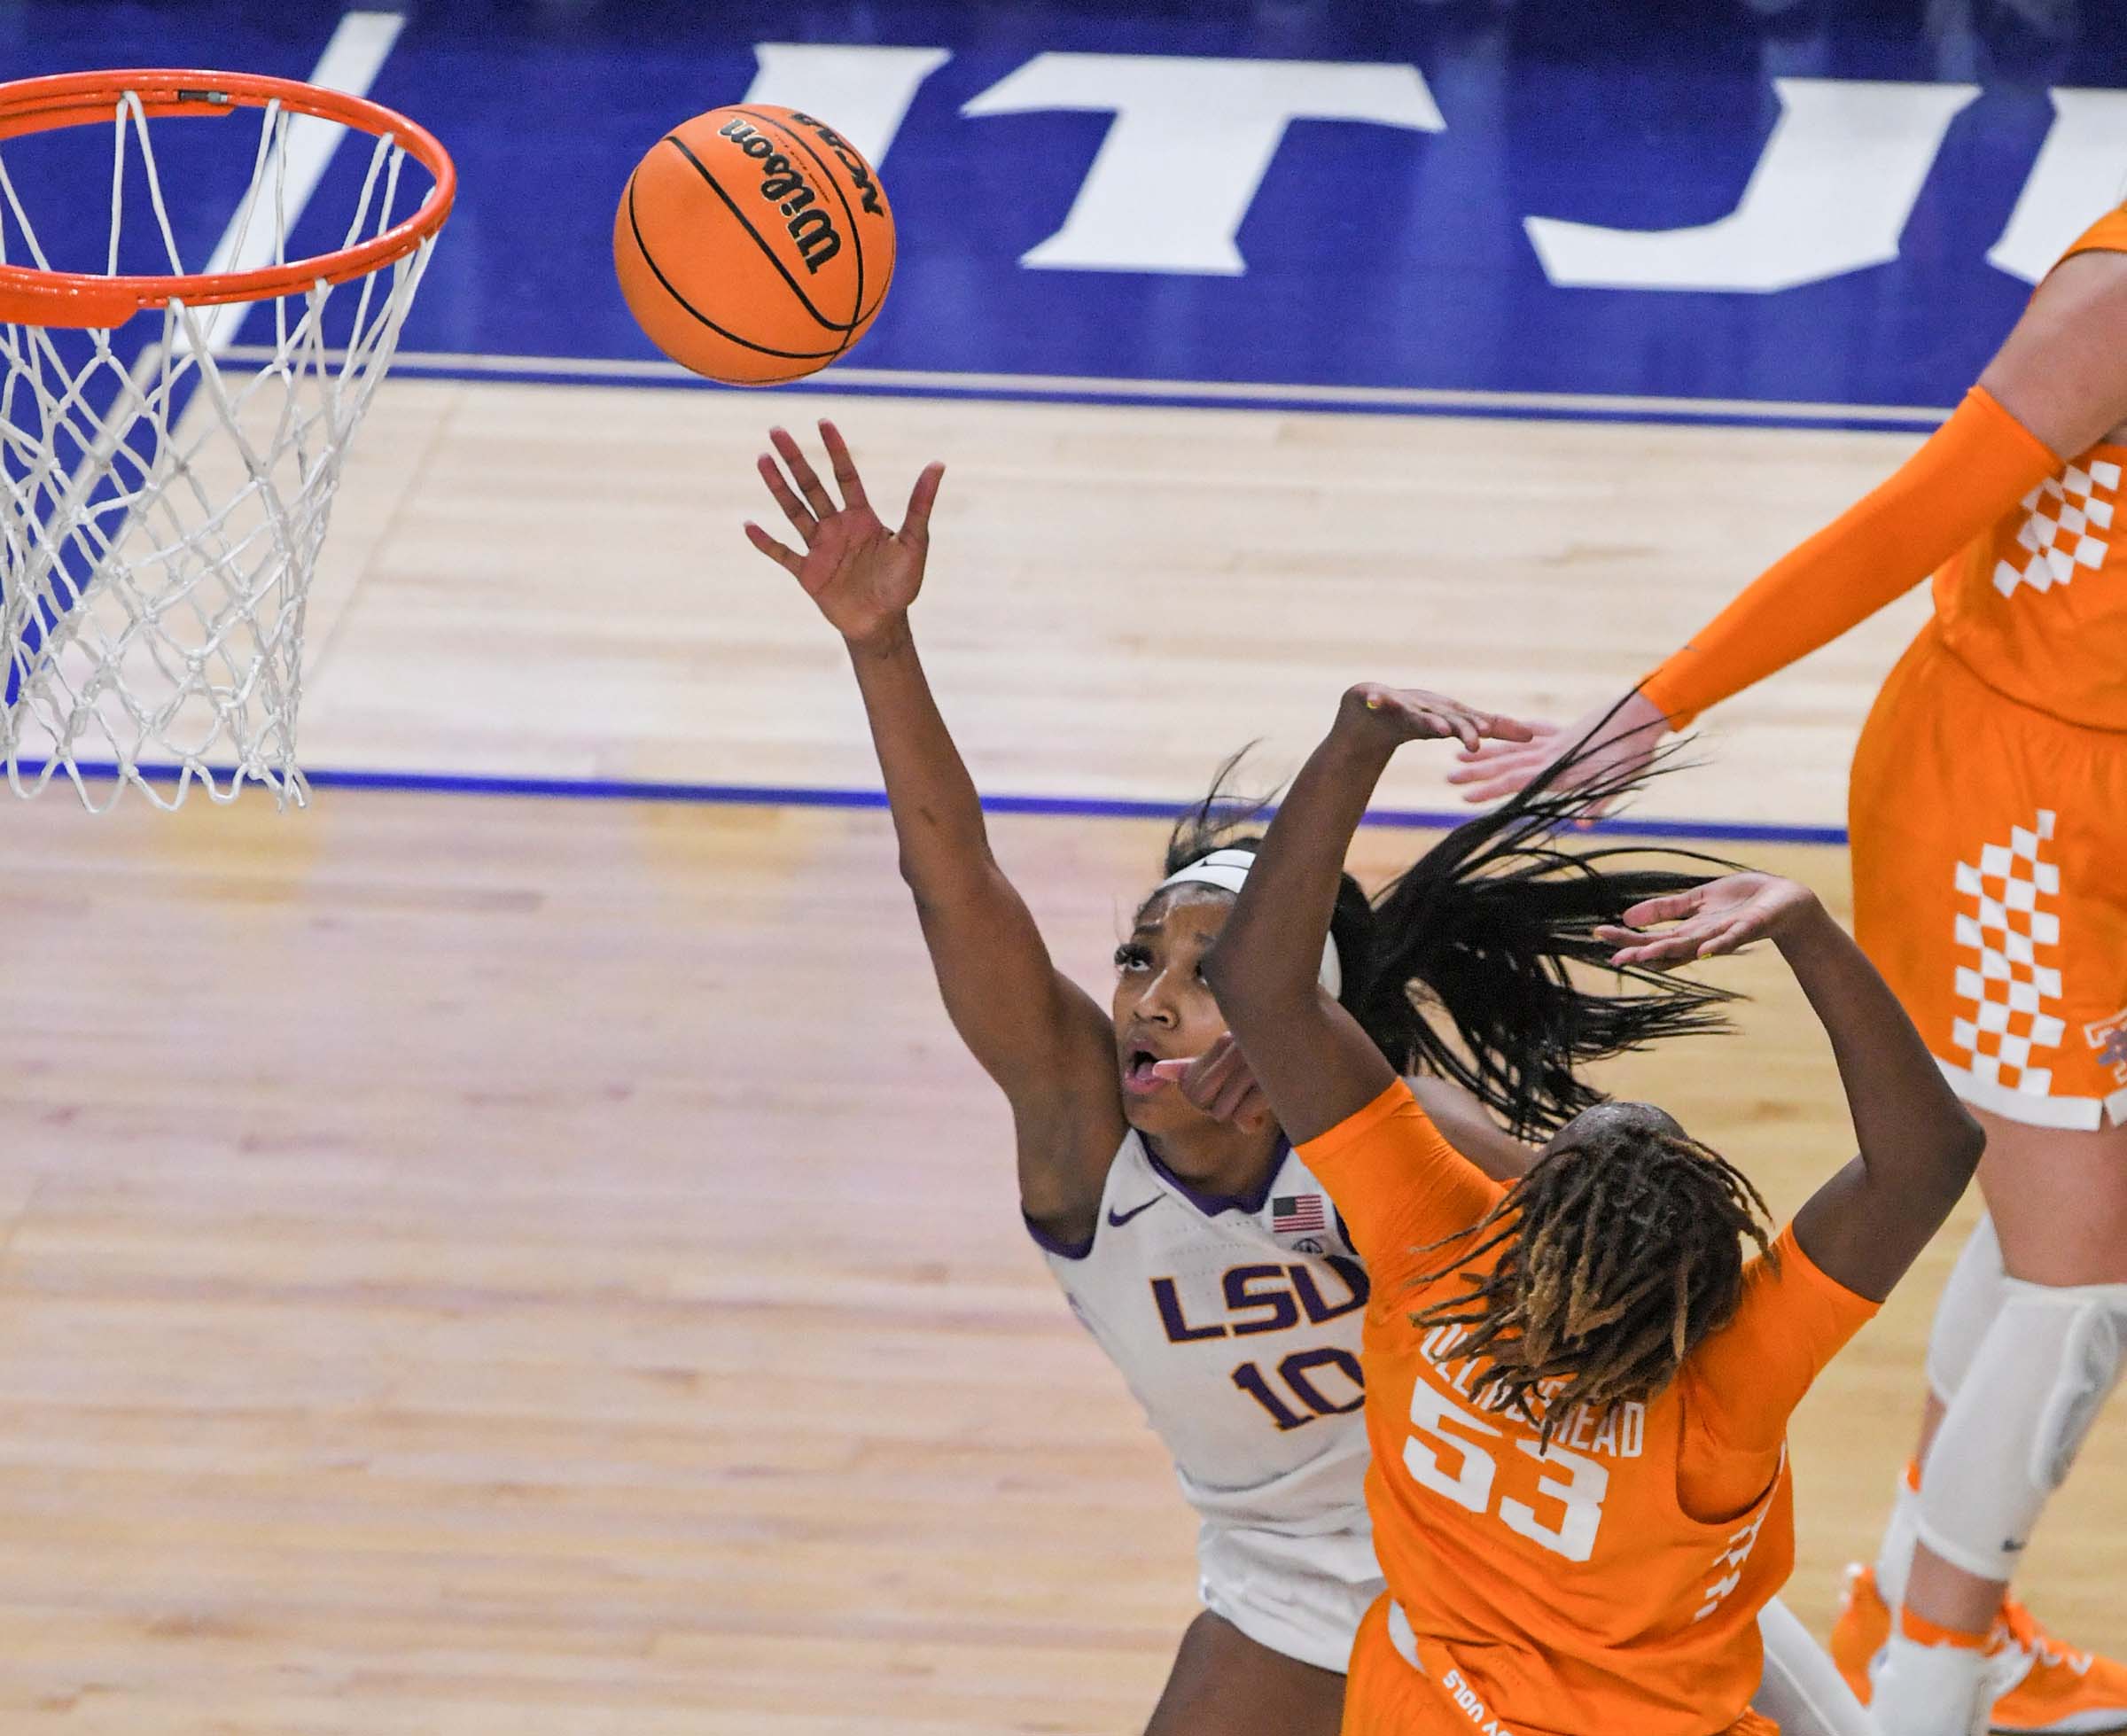 Louisiana State University forward Angel Reese (10) misses a shot late in the game with Tennessee during the fourth quarter of the SEC Women's Basketball Tournament at Bon Secours Wellness Arena in Greenville, S.C. Saturday, March 4, 2023.